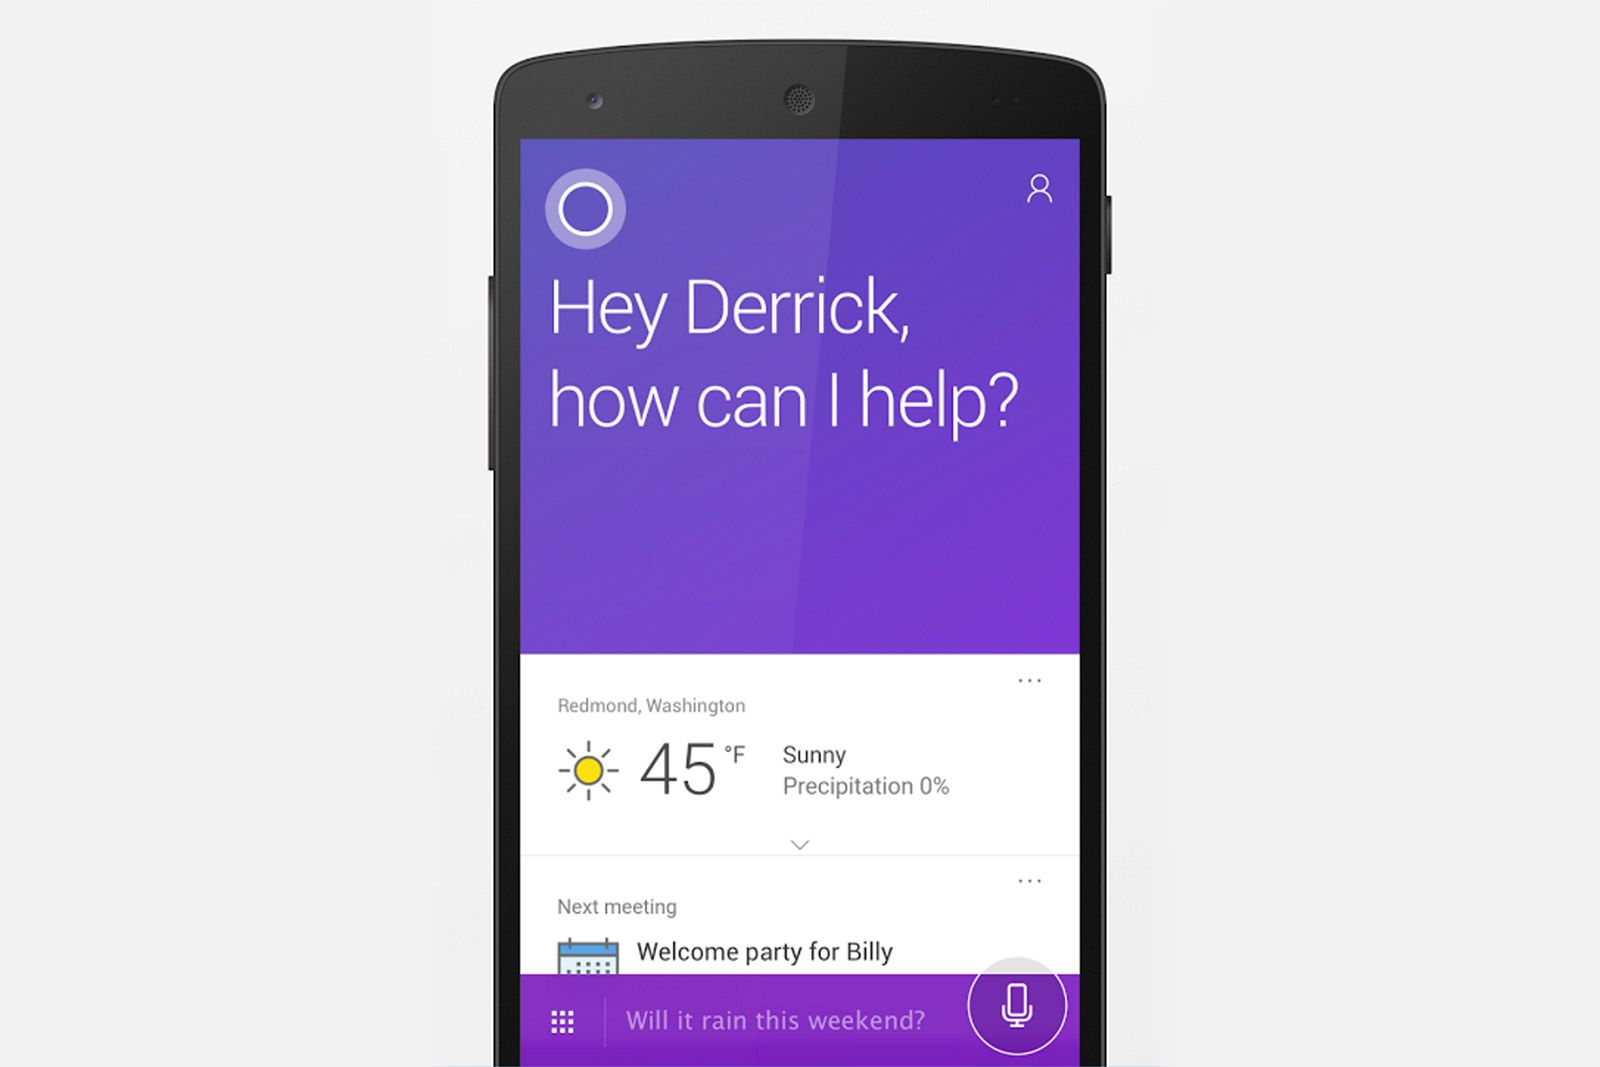 microsoft cortana finally comes to android in the uk iphone within weeks image 1